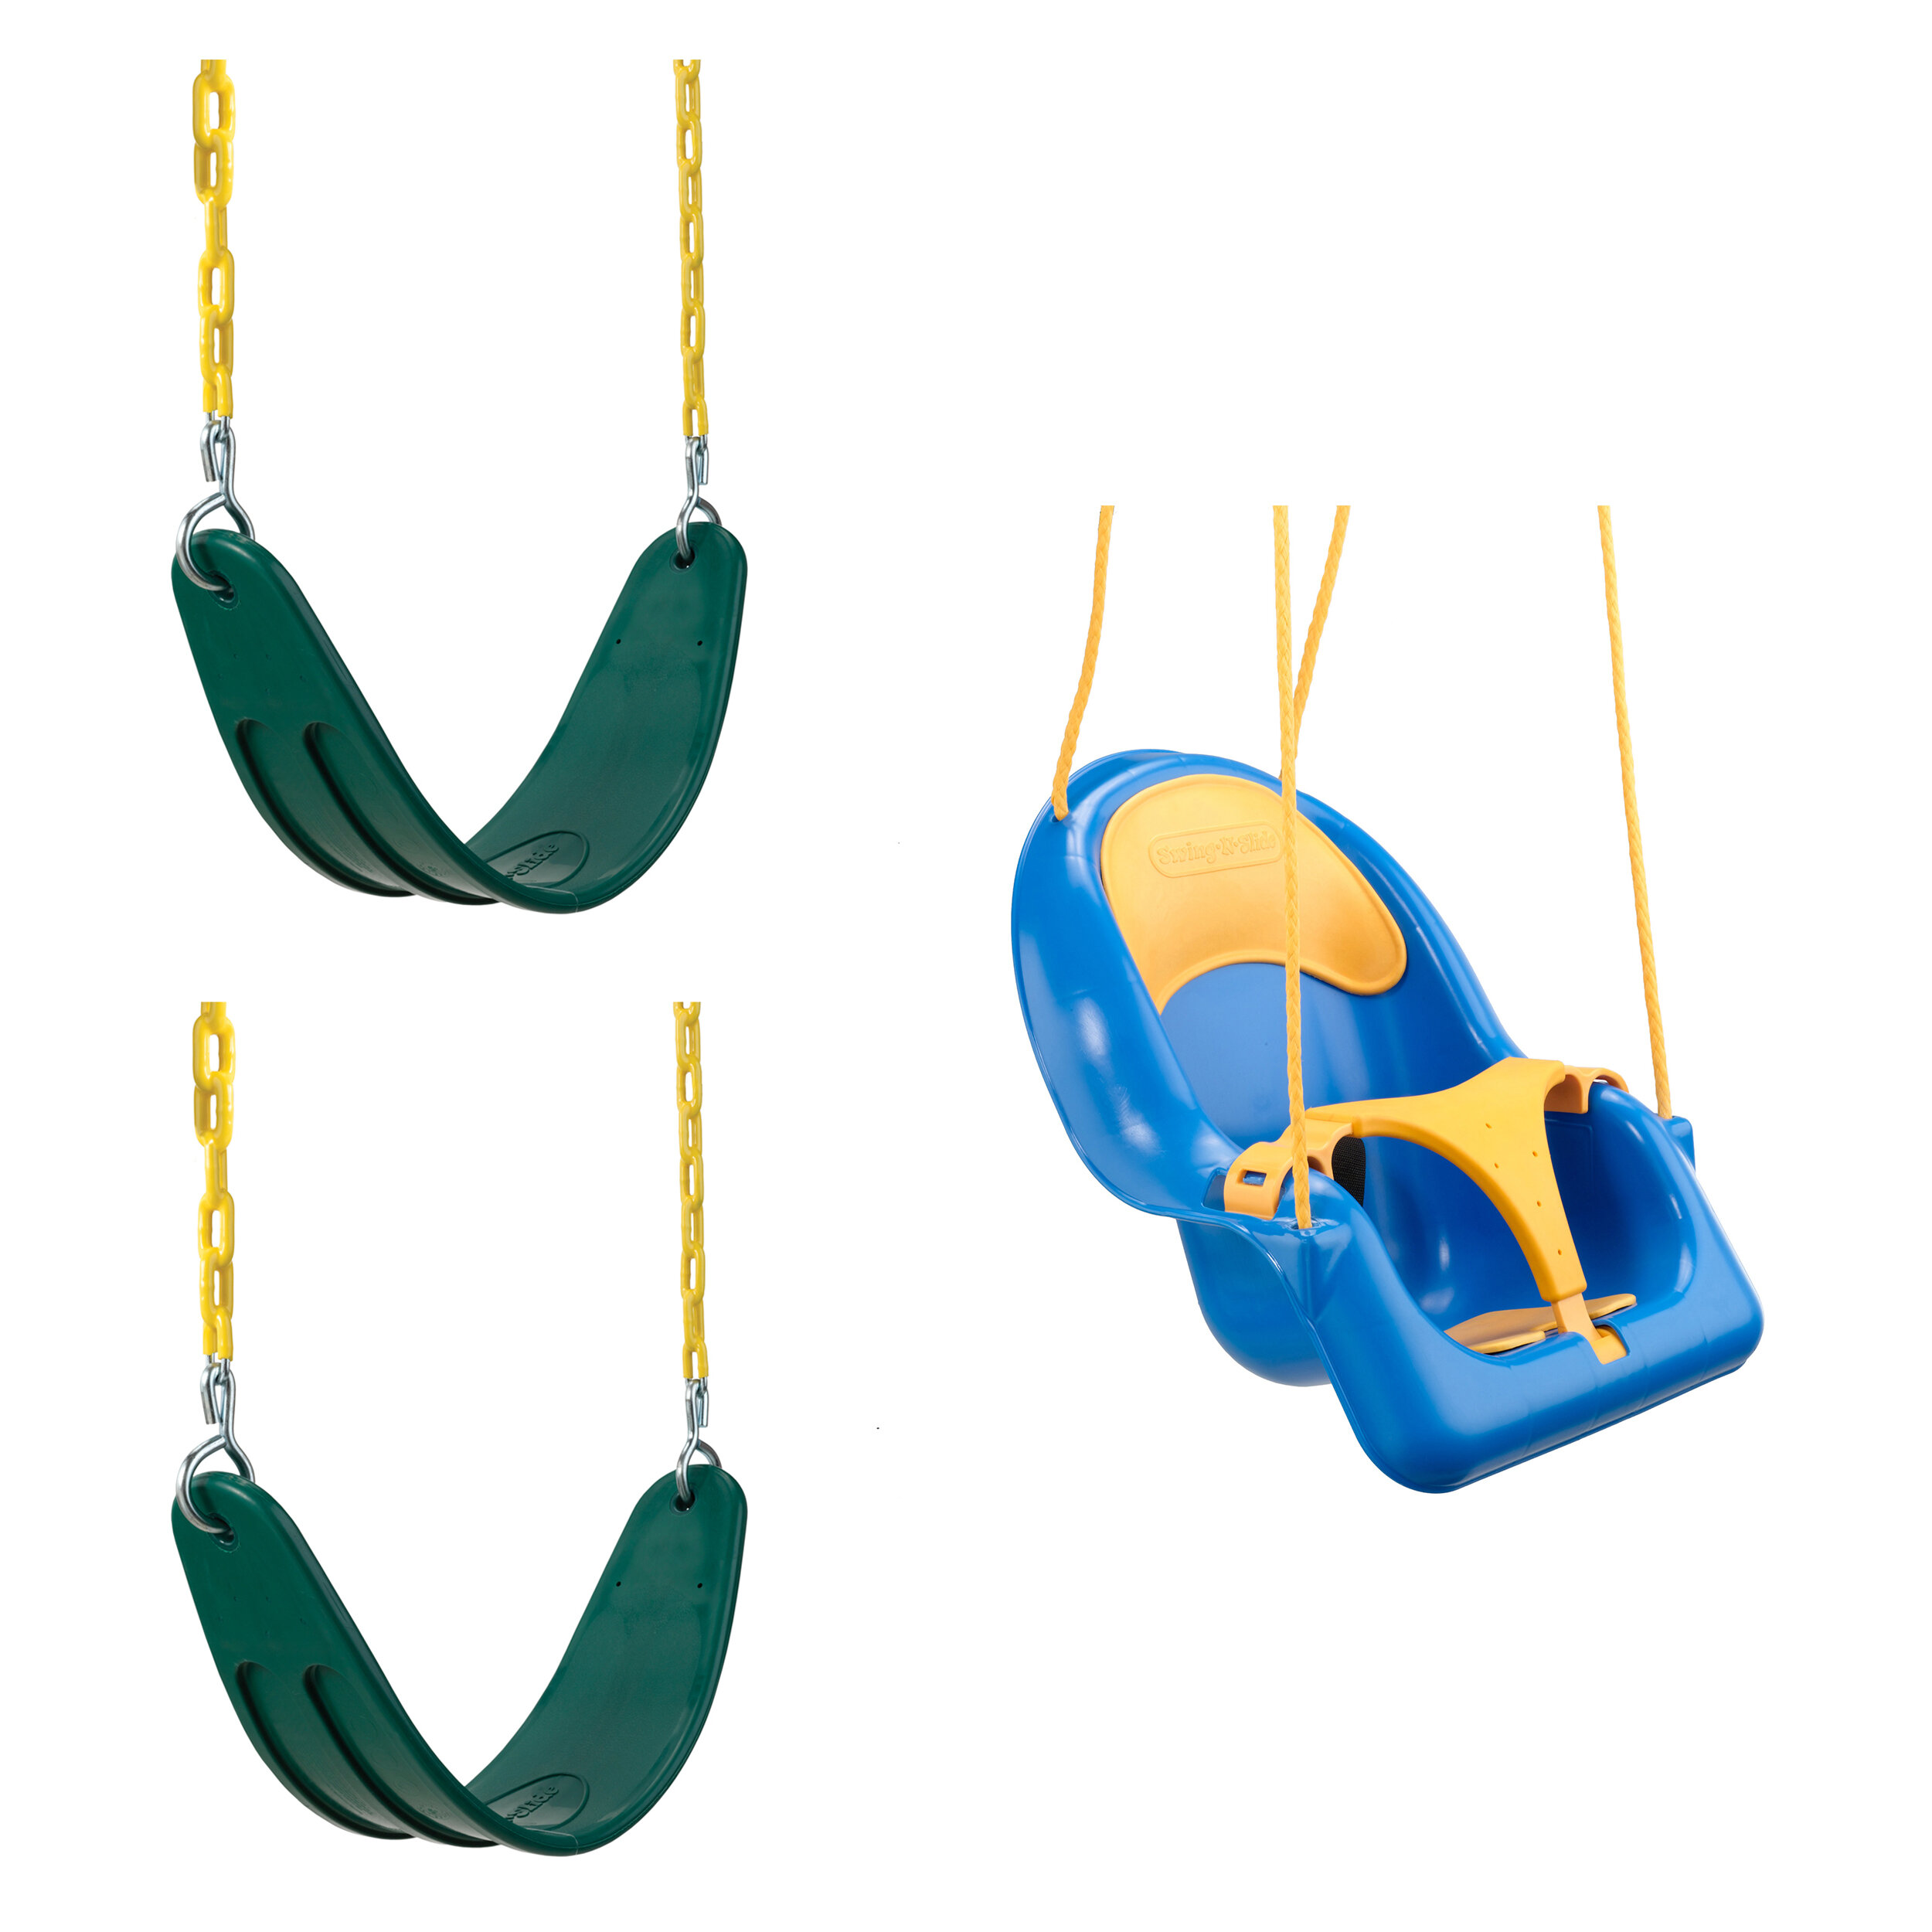 Playground Swings with Coated Chains /& Quick Links Extreme Heavy Duty Swing Seat Set 2 Pack of Outdoor Yellow